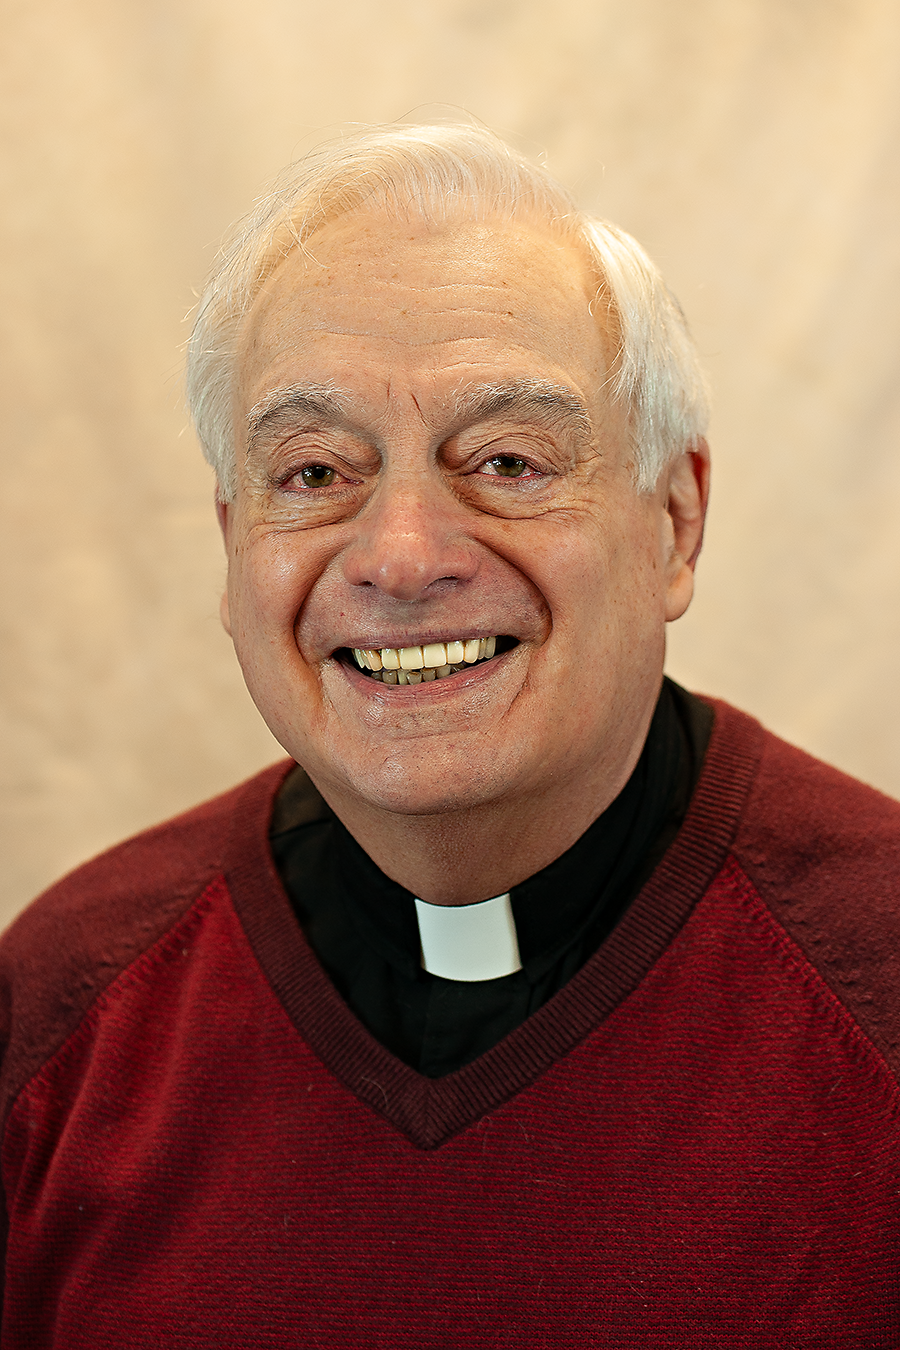 Rev. Nick Lorenzetti is an older priest wearing red with a priest's collar. He has white hair and is smiling.